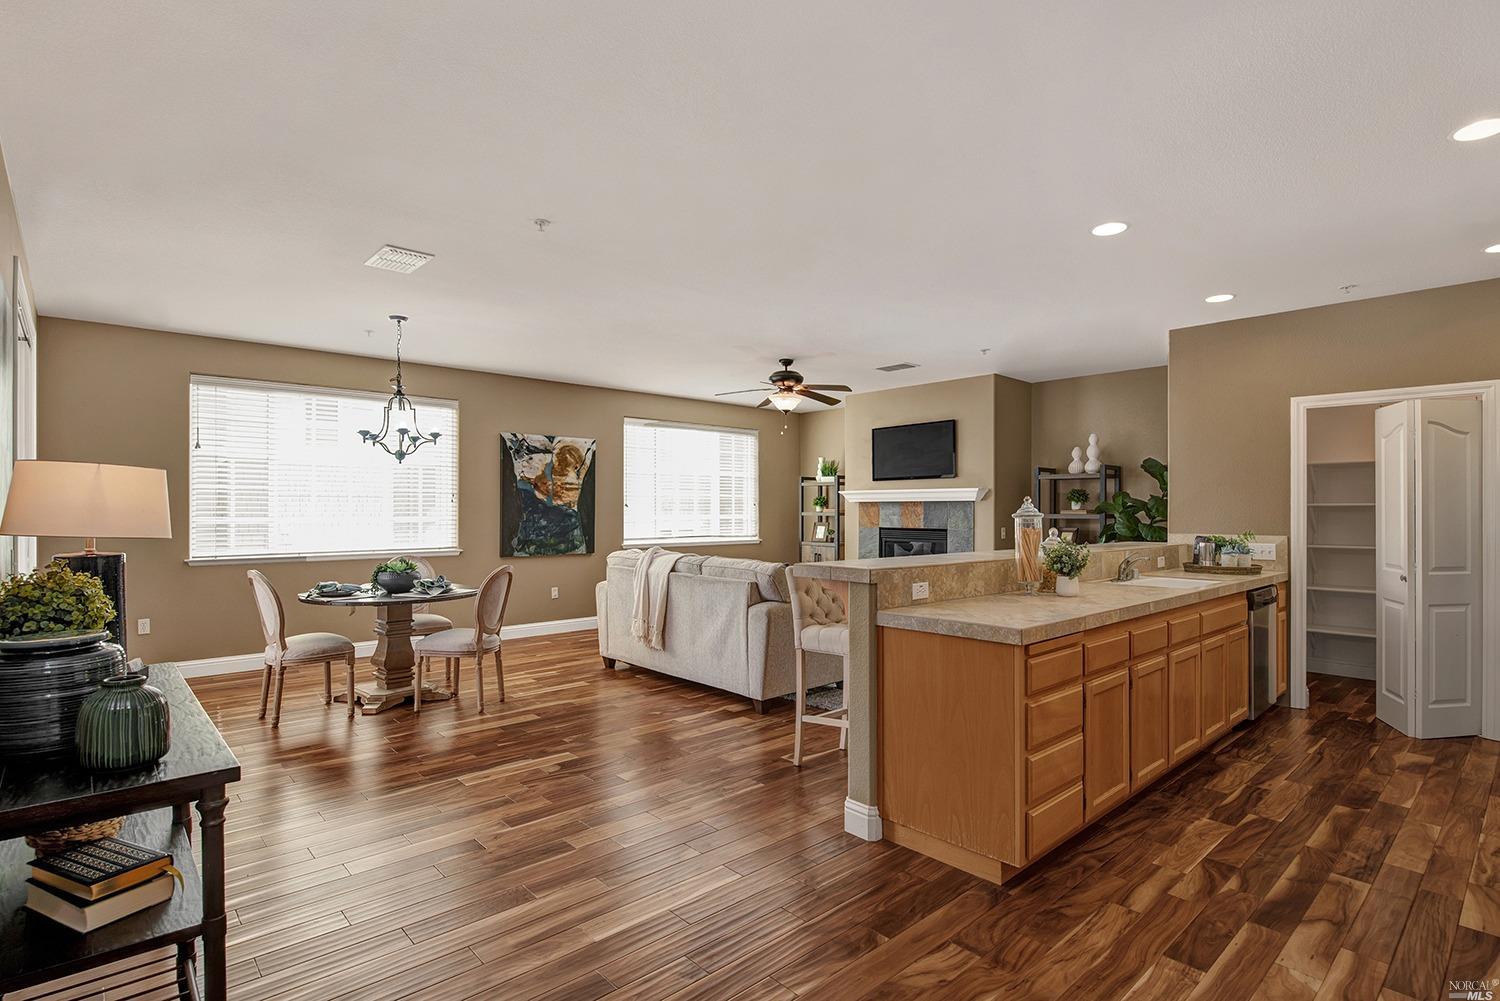 a large white kitchen with wooden floors and stainless steel appliances